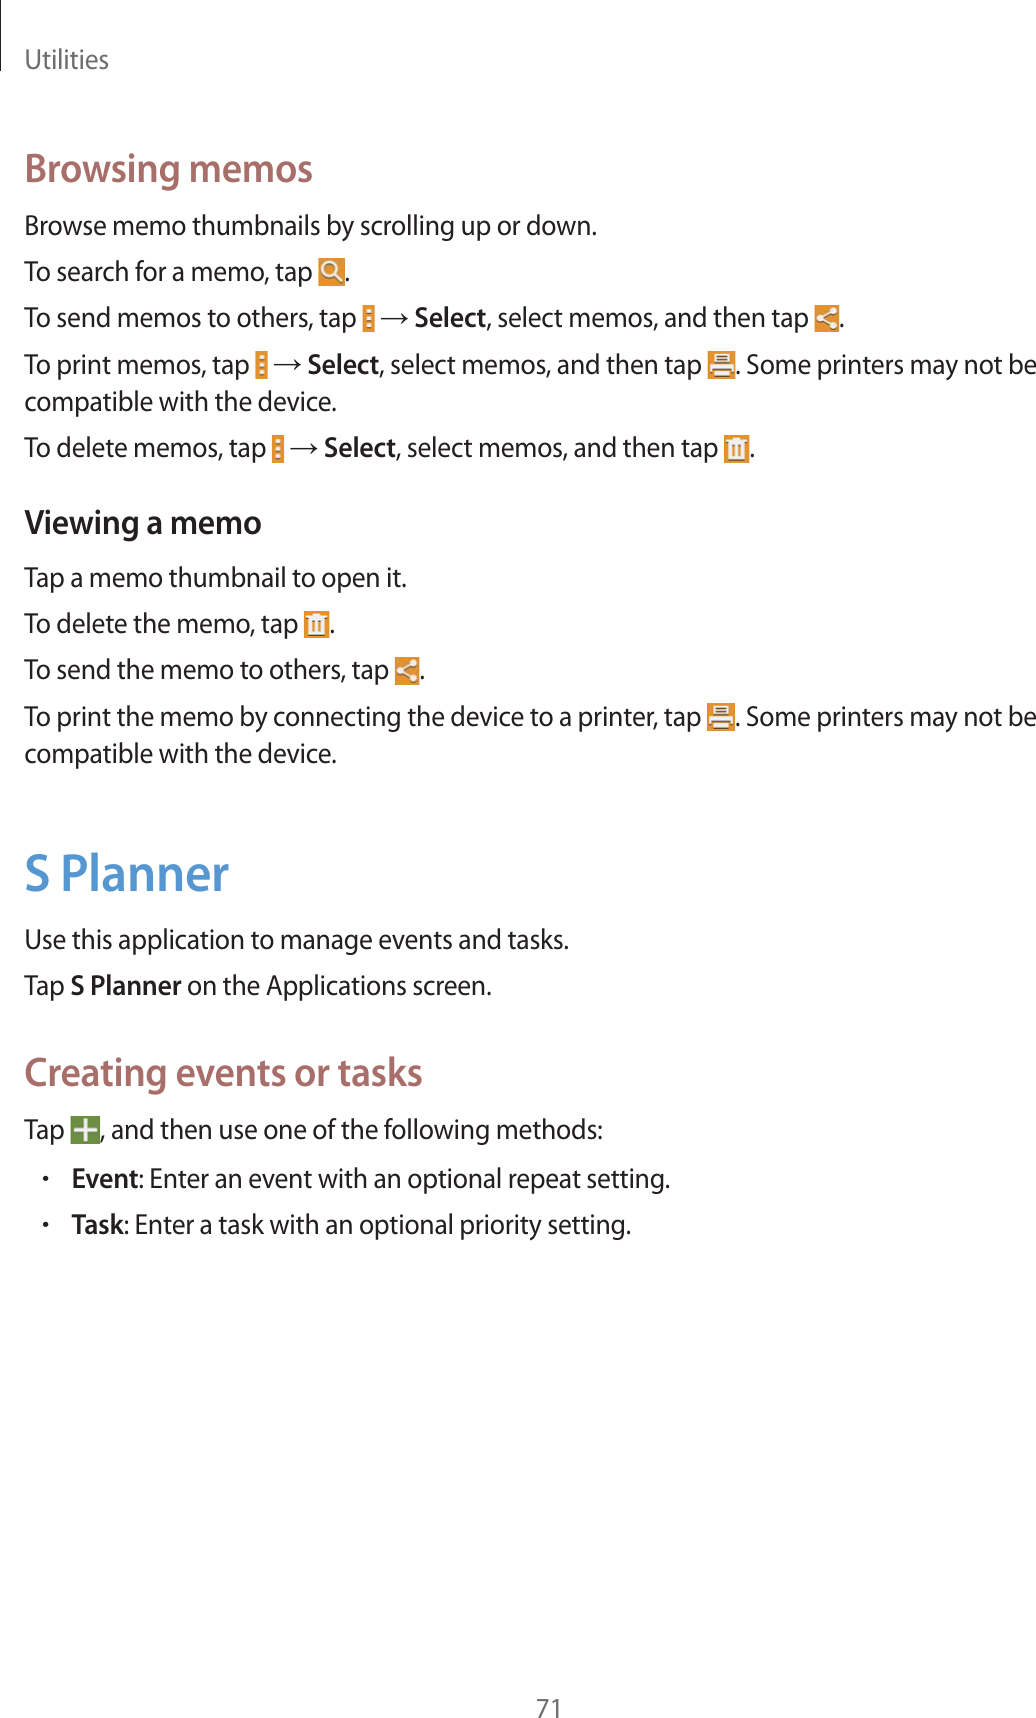 Utilities71Browsing memosBrowse memo thumbnails by scrolling up or down.To search for a memo, tap  .To send memos to others, tap   ĺ Select, select memos, and then tap  .To print memos, tap   ĺ Select, select memos, and then tap  . Some printers may not be compatible with the device.To delete memos, tap   ĺ Select, select memos, and then tap  .Viewing a memoTap a memo thumbnail to open it.To delete the memo, tap  .To send the memo to others, tap  .To print the memo by connecting the device to a printer, tap  . Some printers may not be compatible with the device.S PlannerUse this application to manage events and tasks.Tap S Planner on the Applications screen.Creating events or tasksTap  , and then use one of the following methods:rEvent: Enter an event with an optional repeat setting.rTask: Enter a task with an optional priority setting.